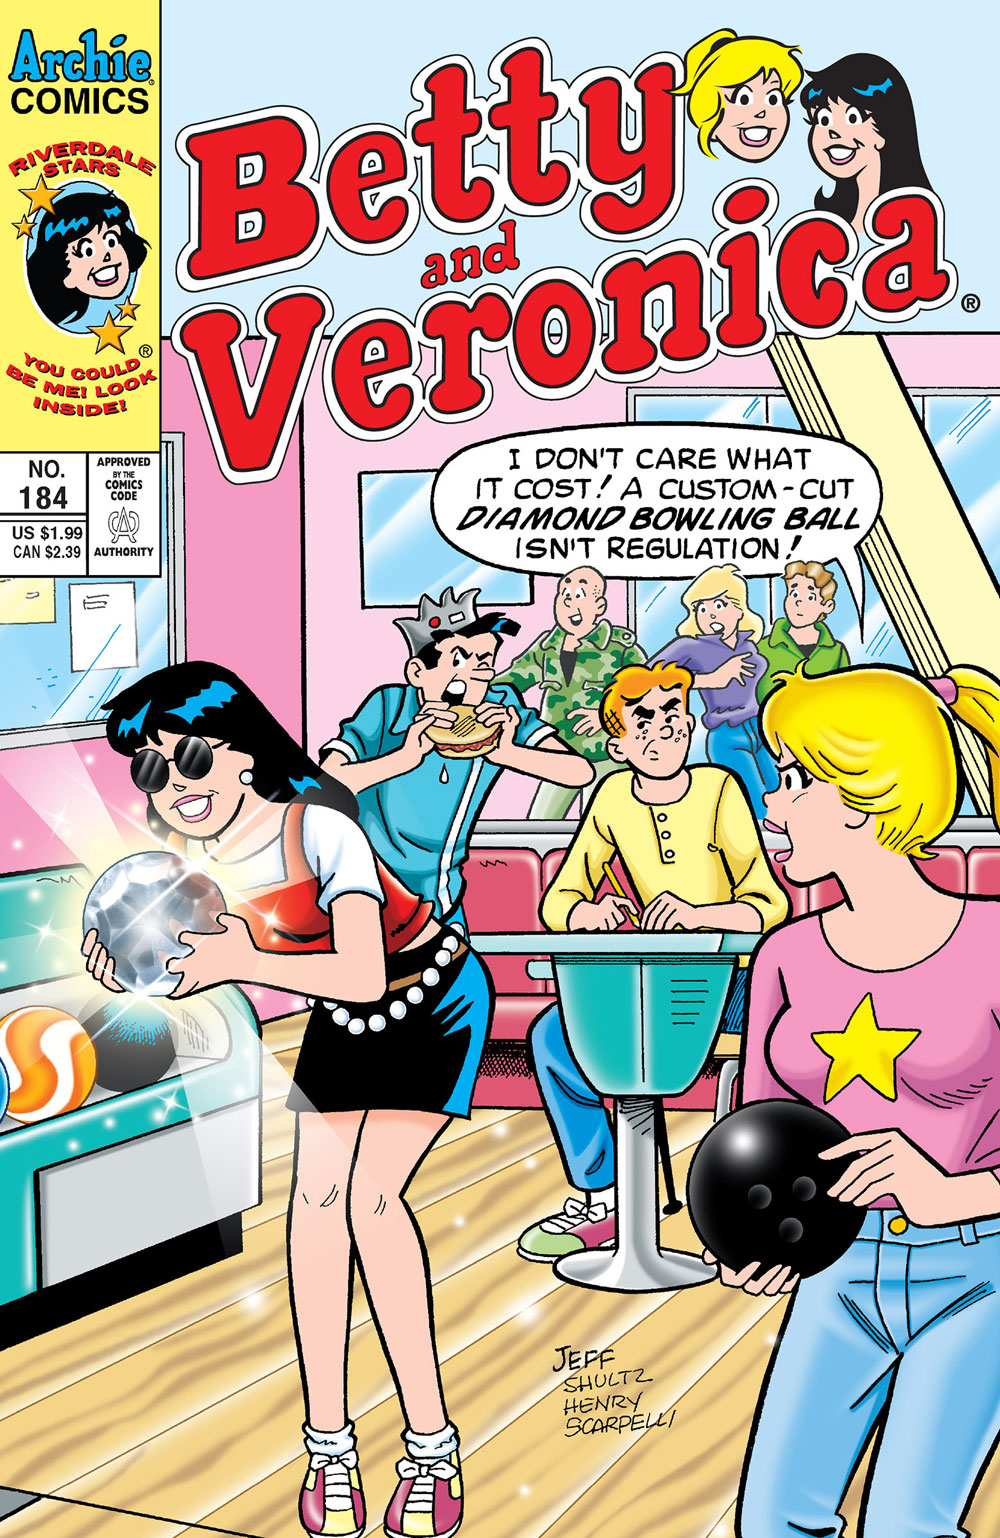 Betty, Veronica, Archie, and Jughead are bowling. Veronica has a shiny diamond bowling ball that's glittering so brightly she has to wear sunglasses. Betty looks angry and says it's against regulations. Archie and Jughead look at Veronica suspiciously. Archie is keeping score and Jughead is eating a hamburger.